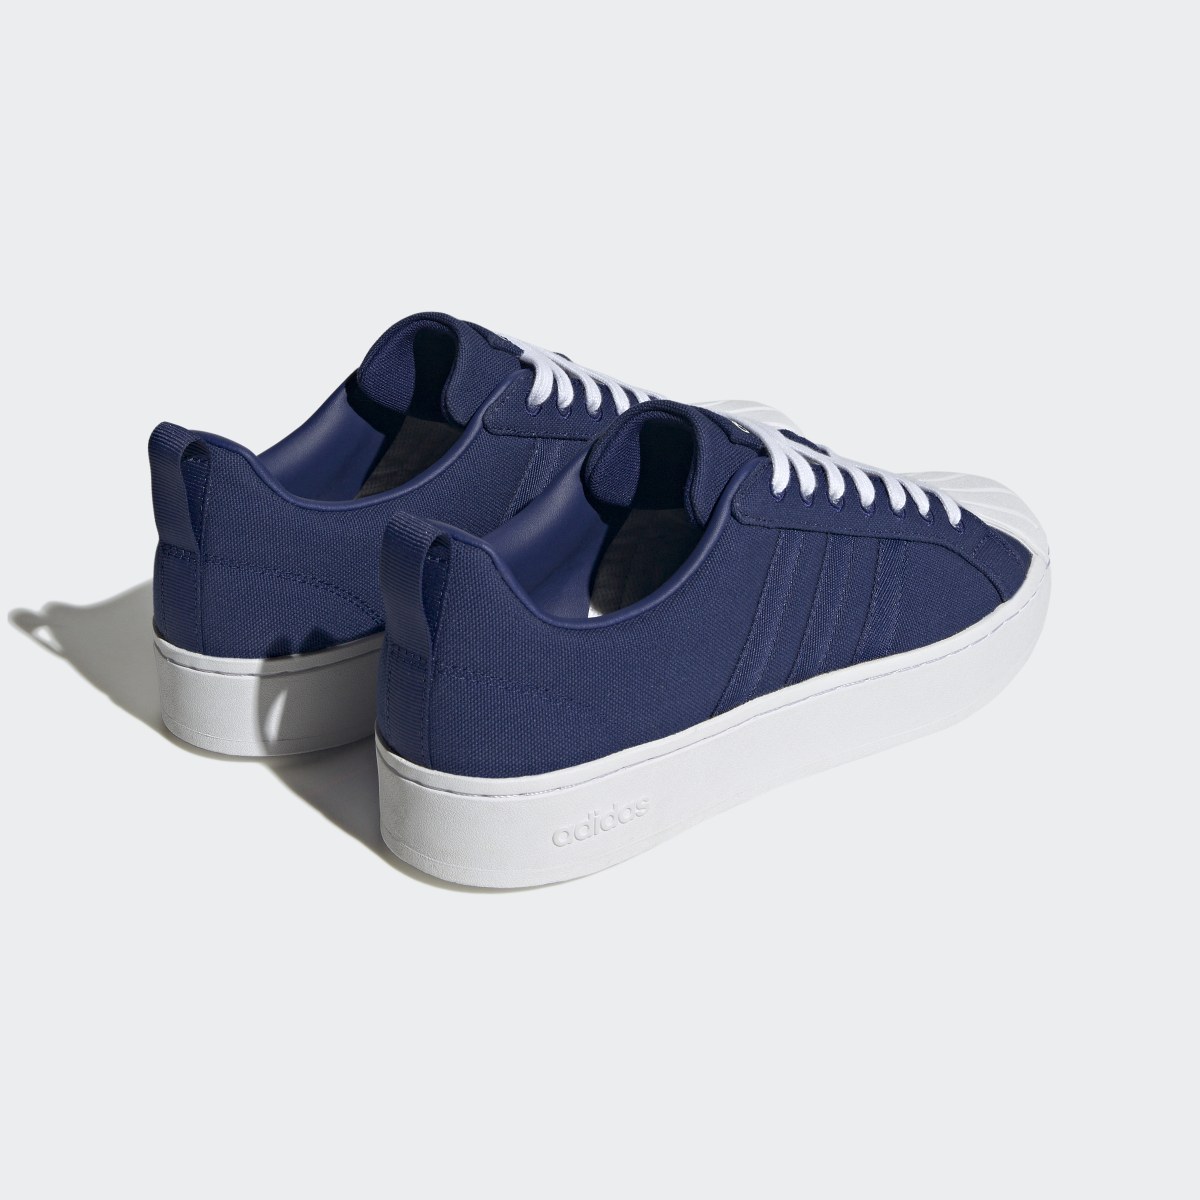 Adidas Streetcheck Cloudfoam Lifestyle Low Court Shoes. 6